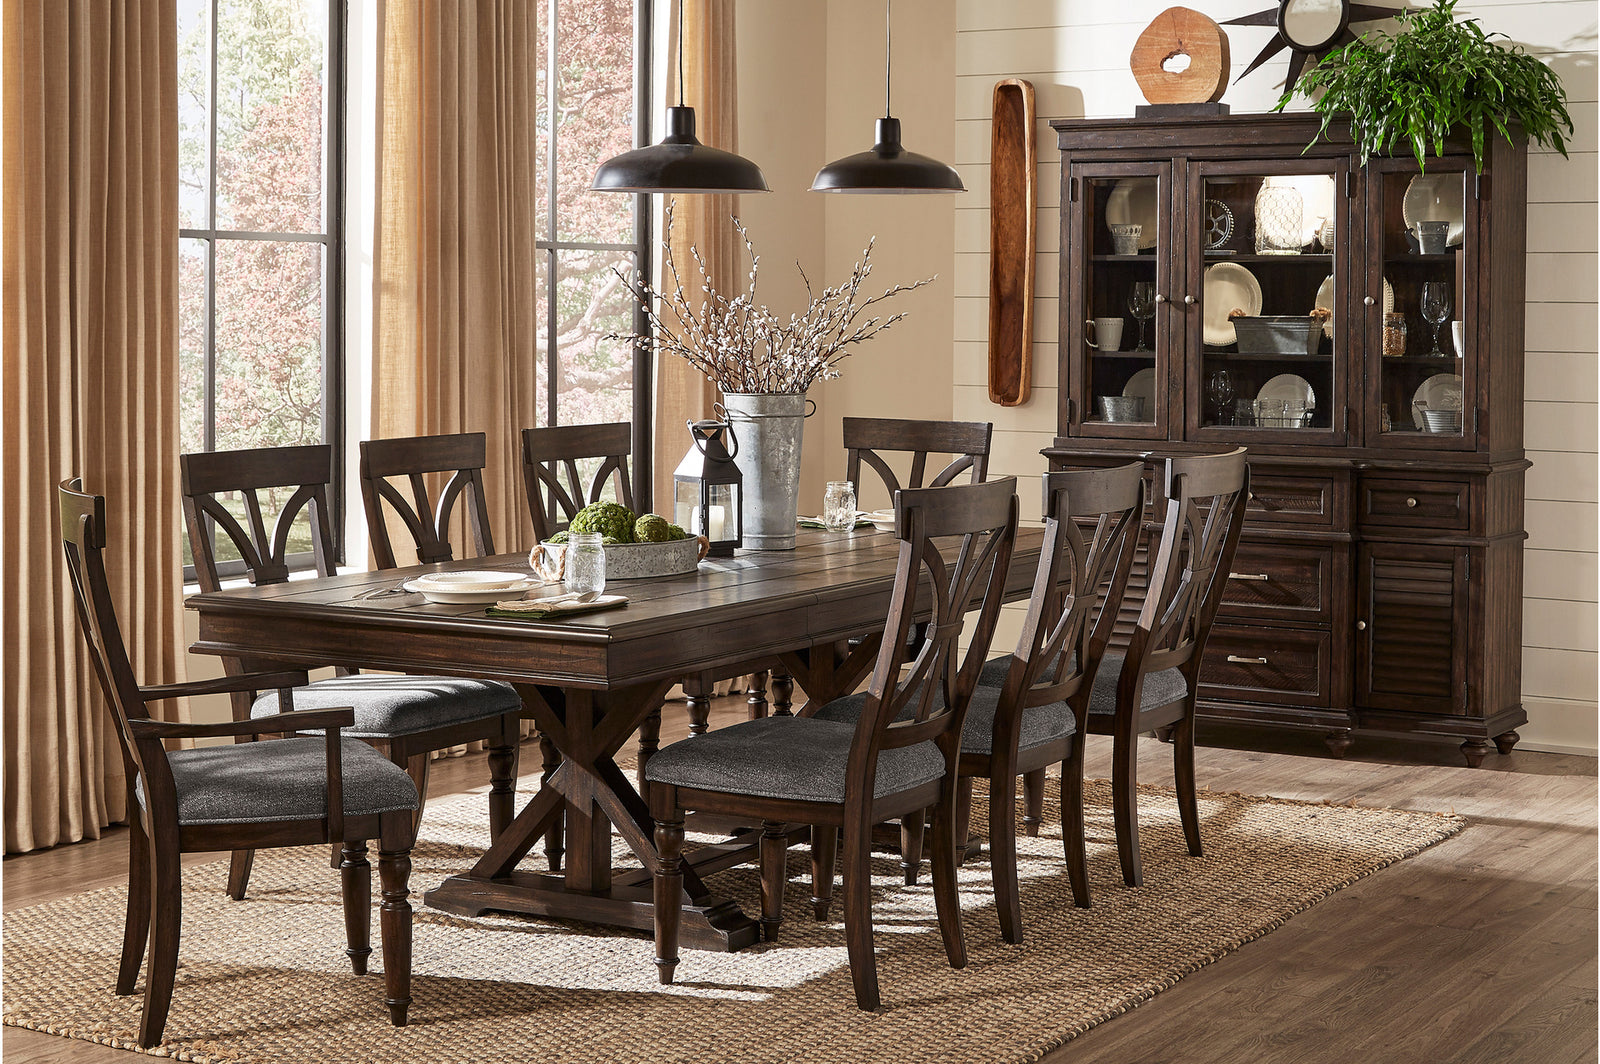 Cardano Charcoal Traditional Solid Wood Fabric Upholstery Seat Rectangular Dining Room Set